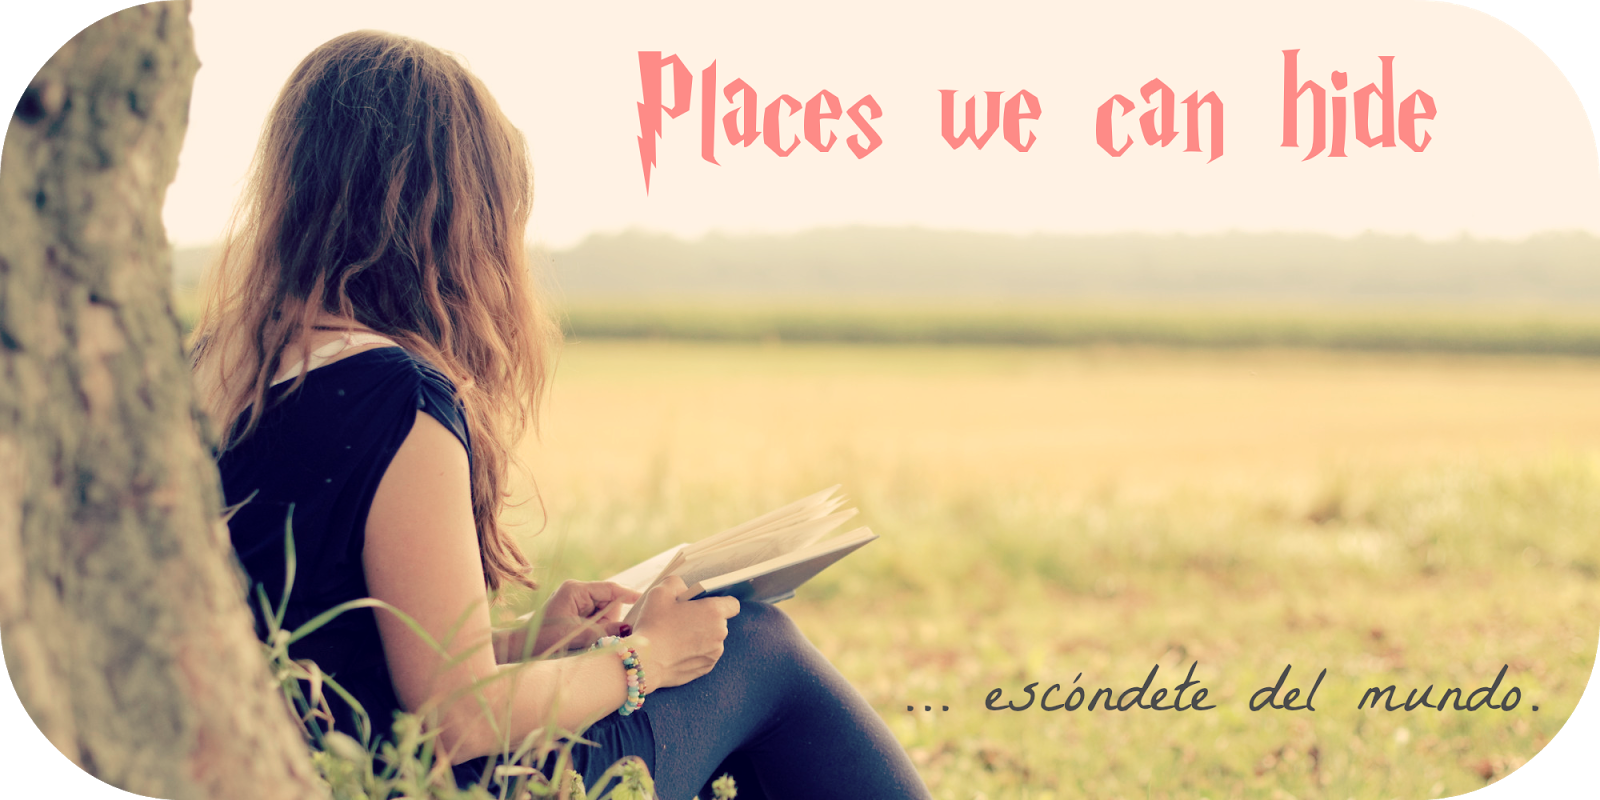 Places we can hide